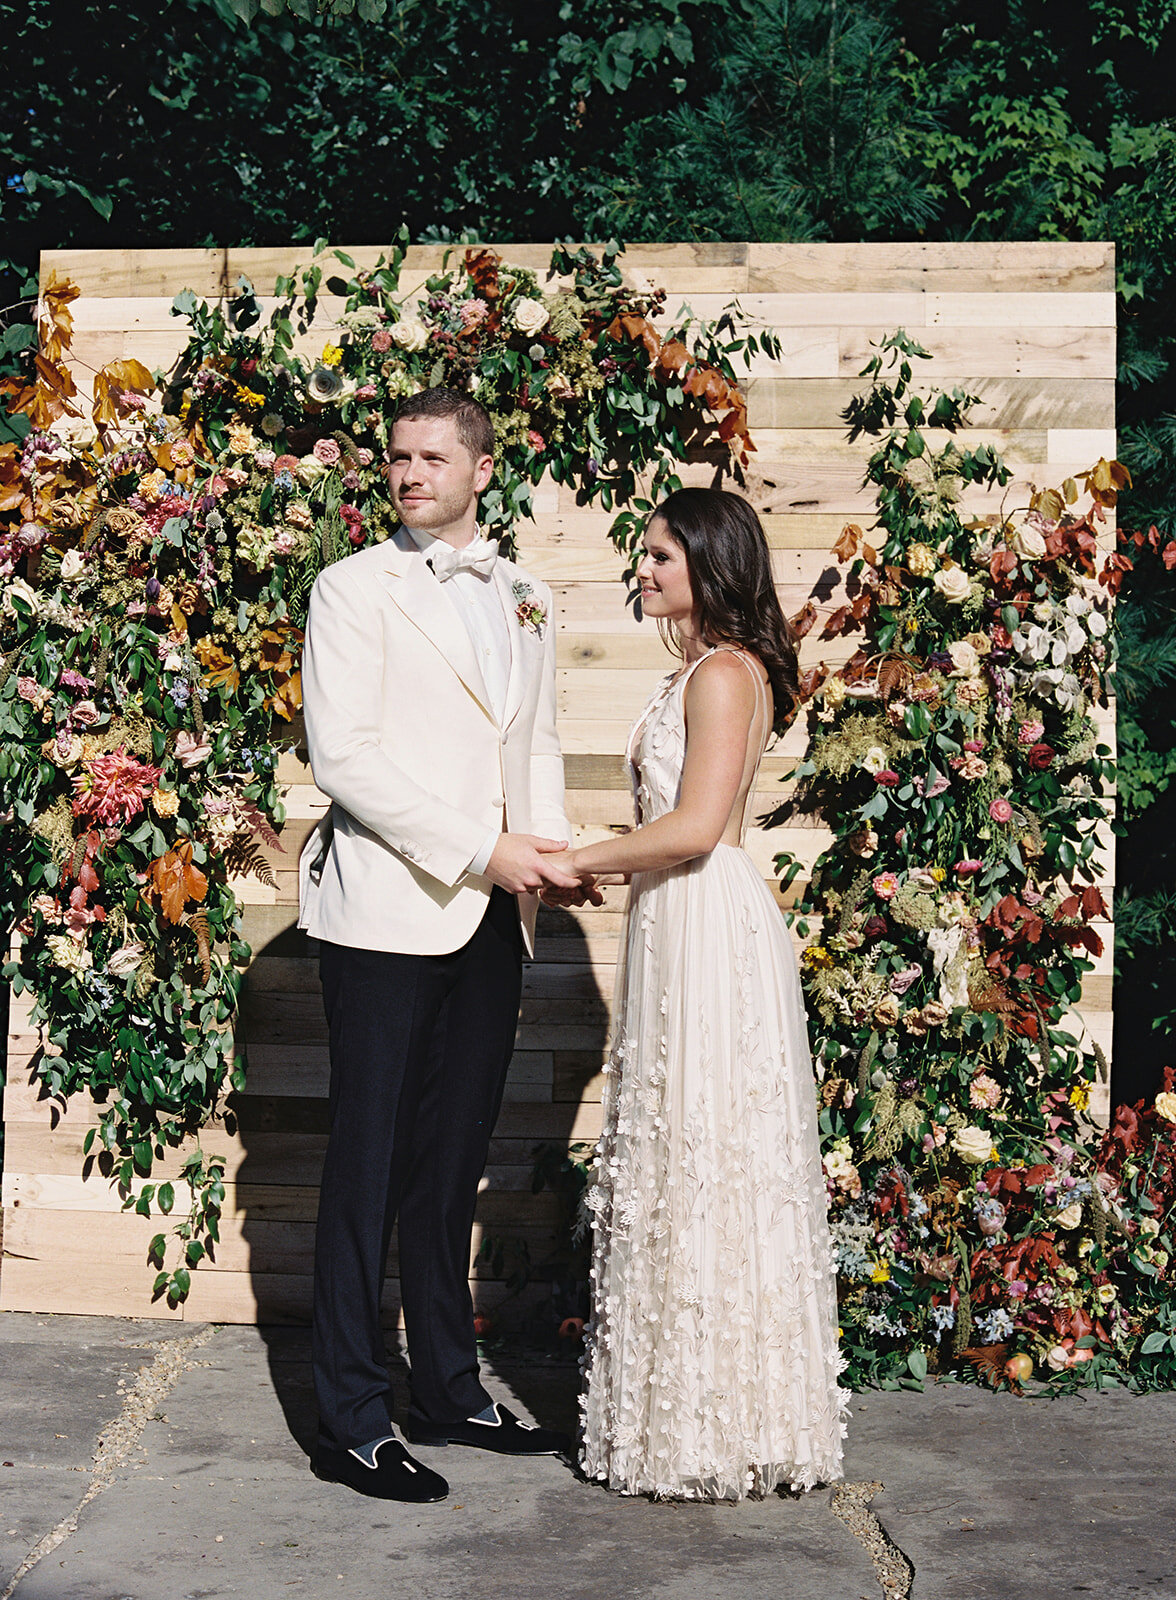 Reclaimed wood wall built by the father of the bride with lush, garden-inspired floral installation, using wildflowers, hops, fruiting branches, copper beech, ranunculus, garden roses, and tulips. RT Lodge wedding ceremony flowers.